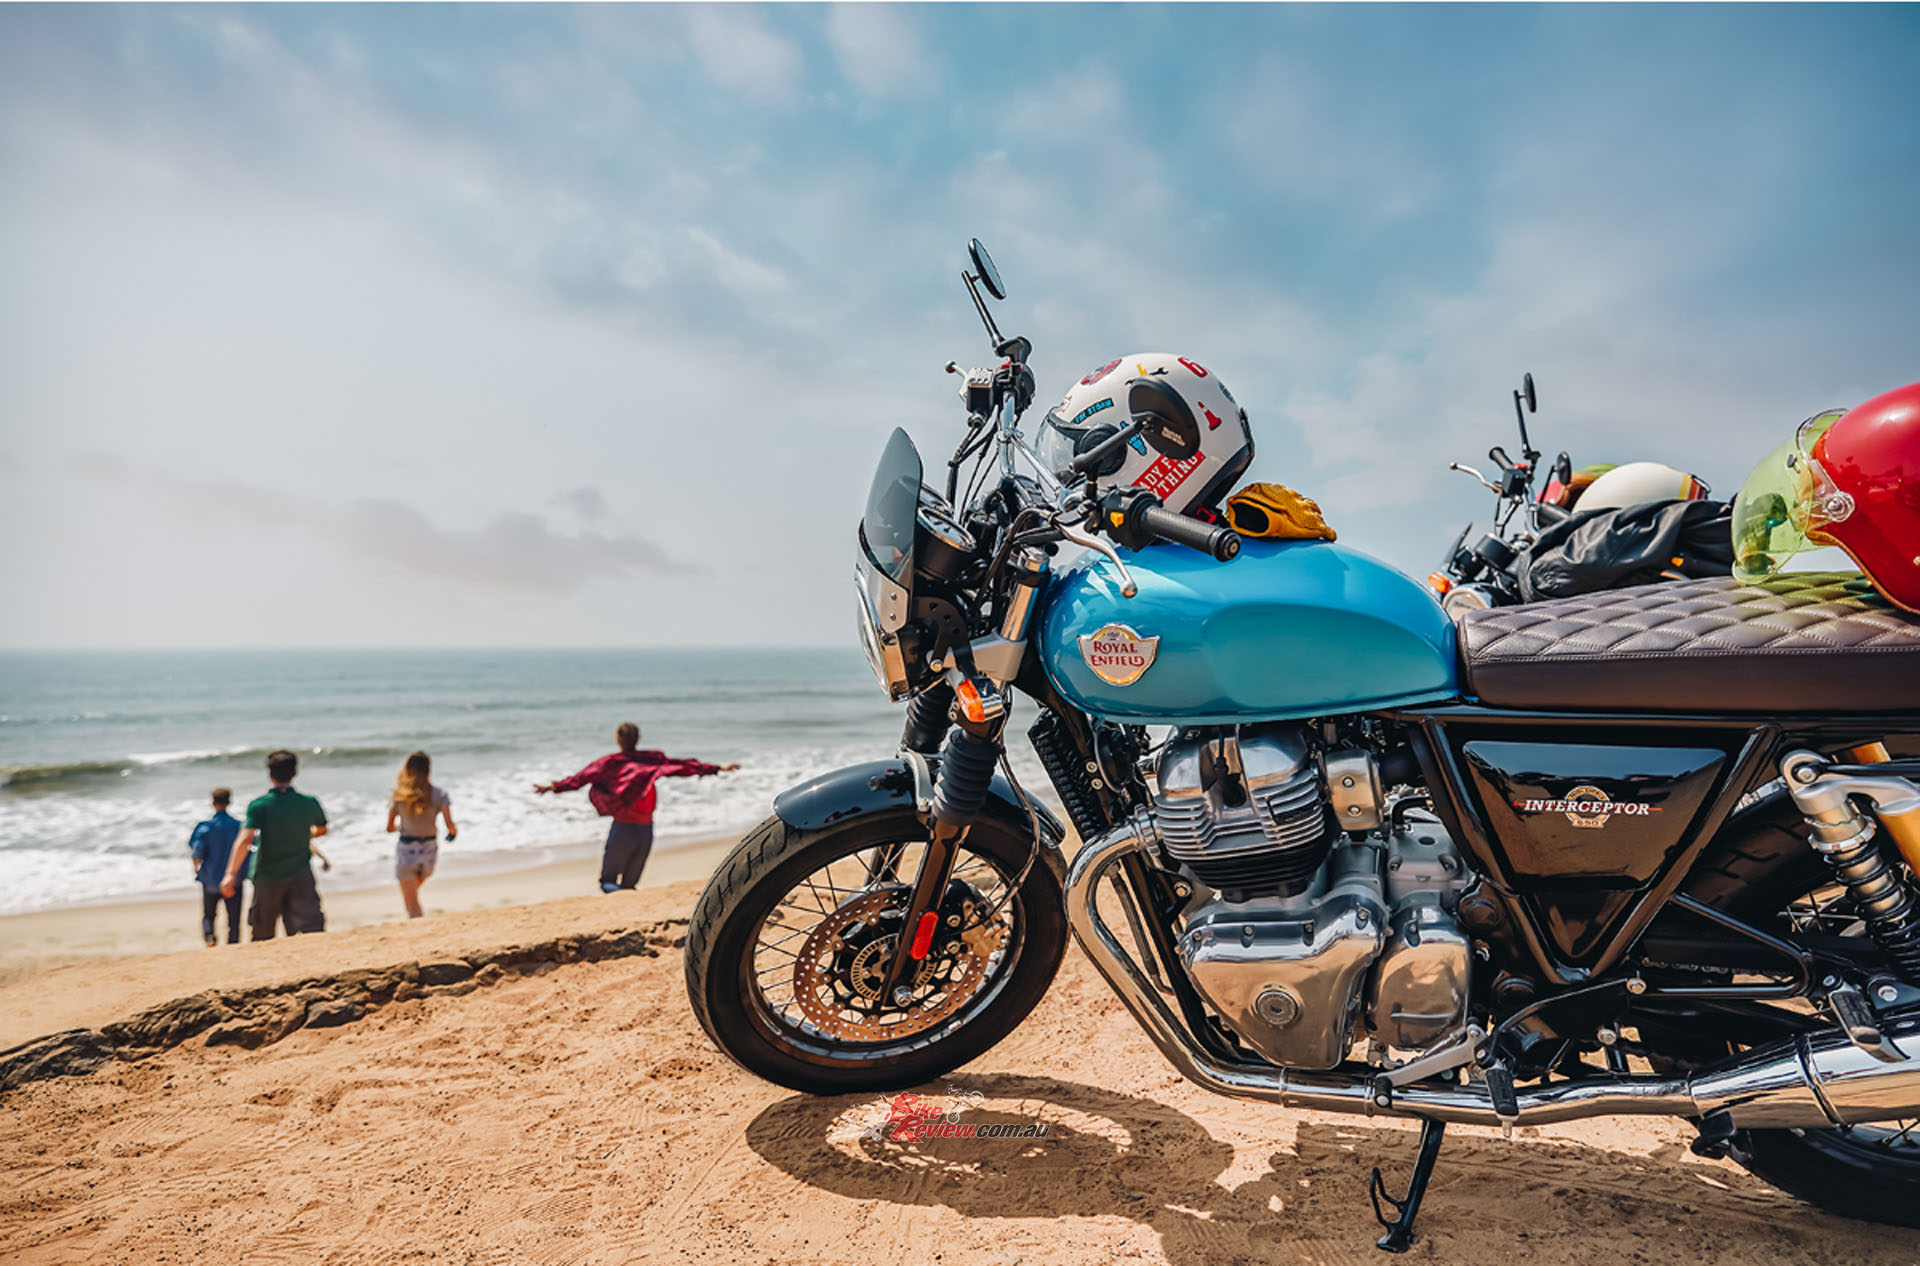 You can throw your leg over a new Royal Enfield now with the 3.99% PA comparison rate until the 3rd of April 2022, check out their range at your local dealership today!